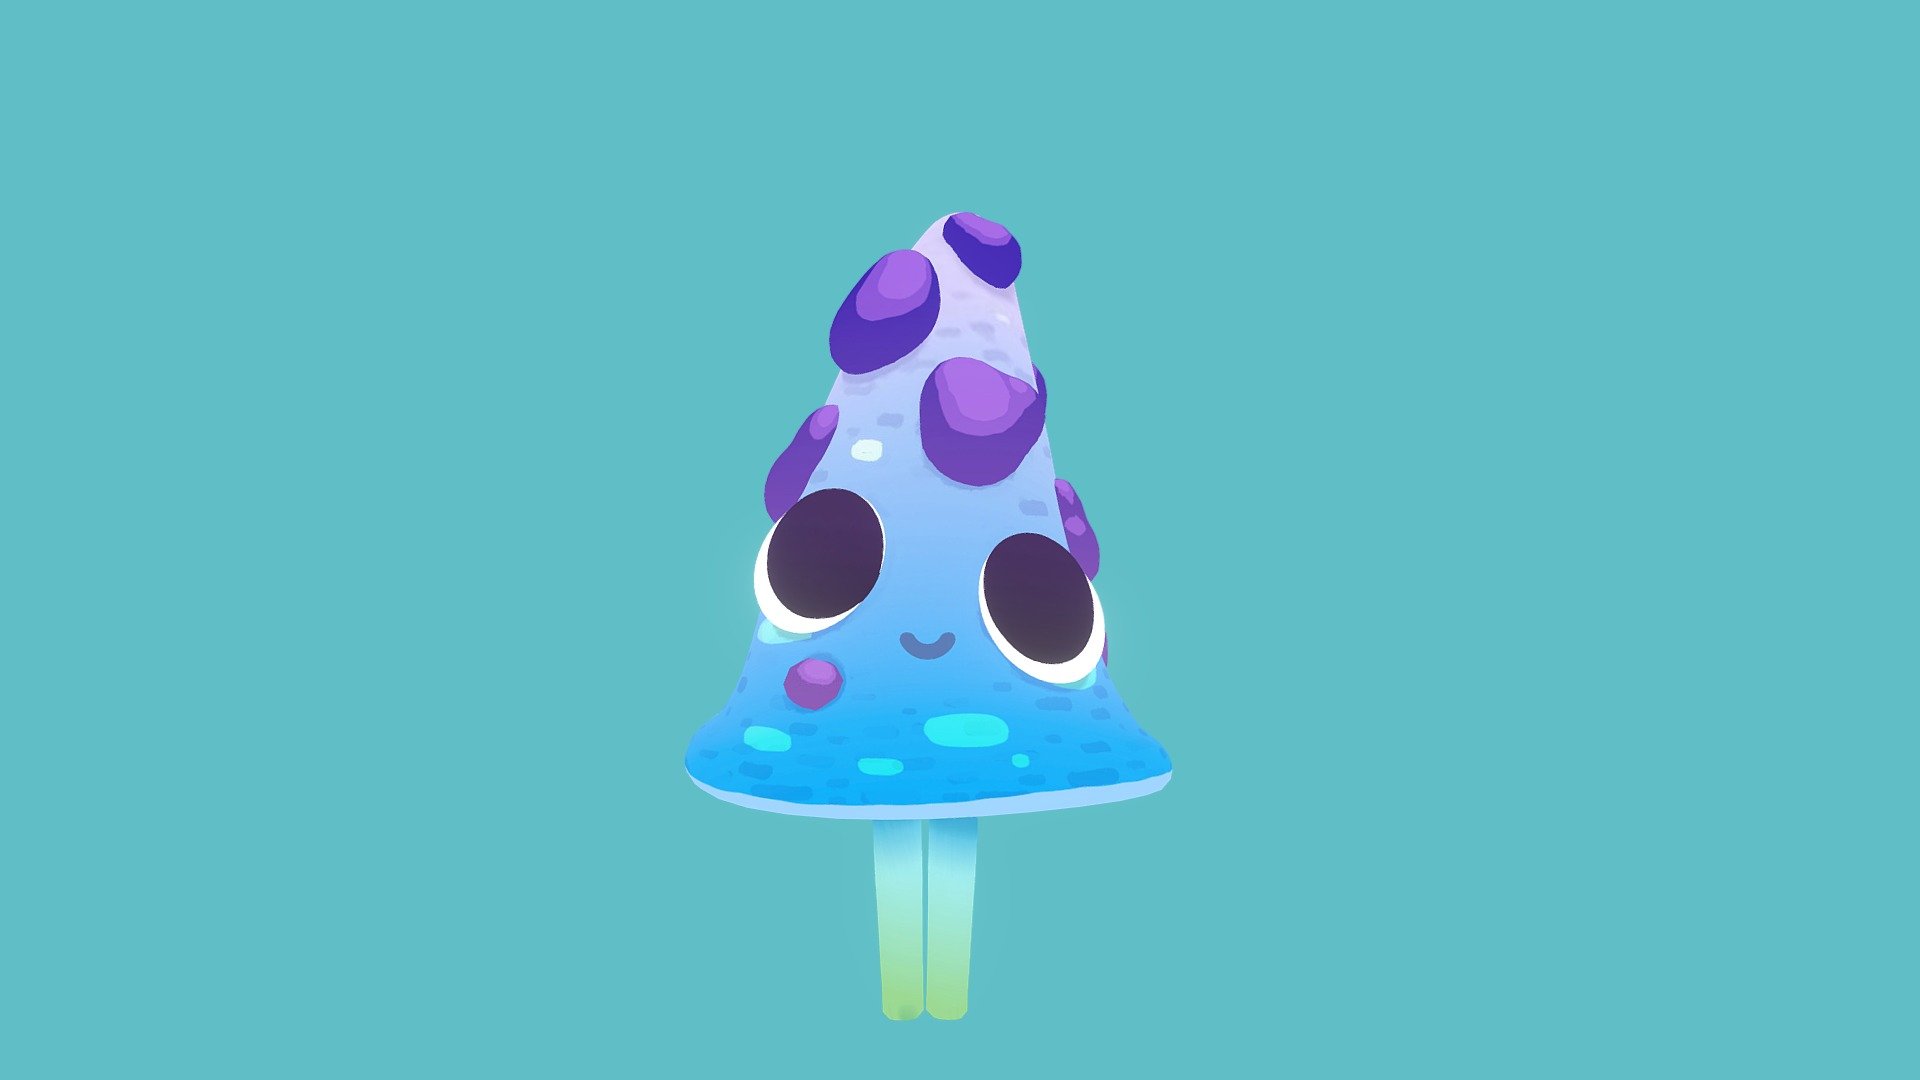 Check out his gif with some sparkling particle effects here! 

I'm trying to do more stylized 3D art, since it's what I've always enjoyed looking at.  

Based off these mushroom pets from one of my old sketchbooks: 

 - Mushy Buddy - Download Free 3D model by gorgon season (@gorgonseason) 3d model